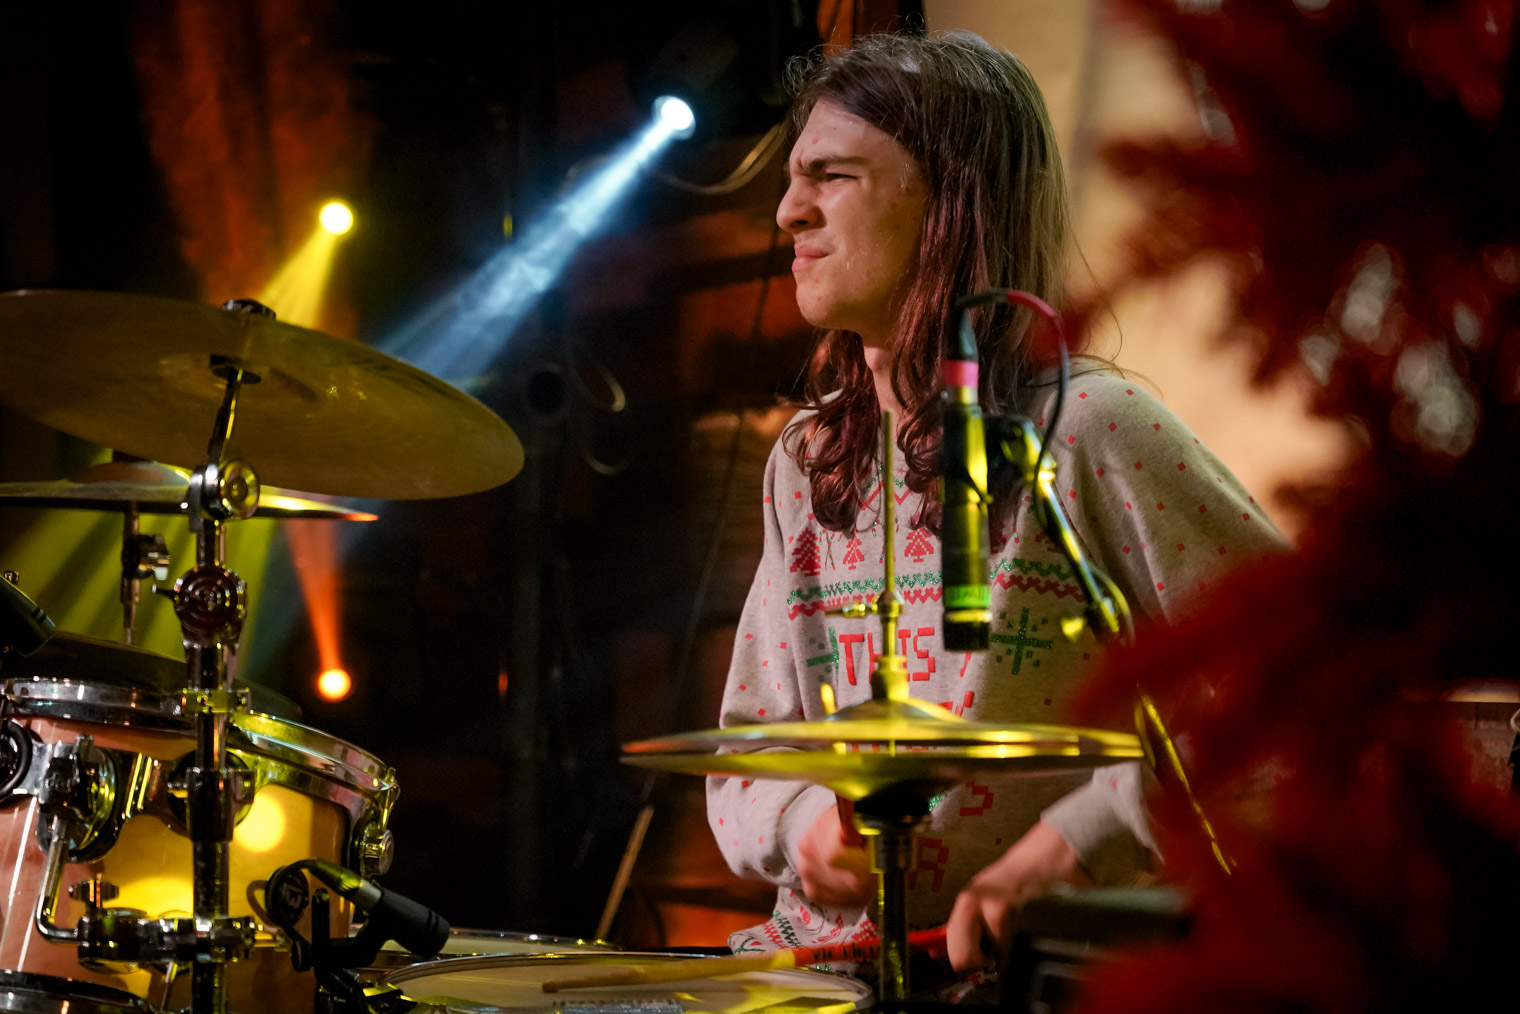 A musician playing drums